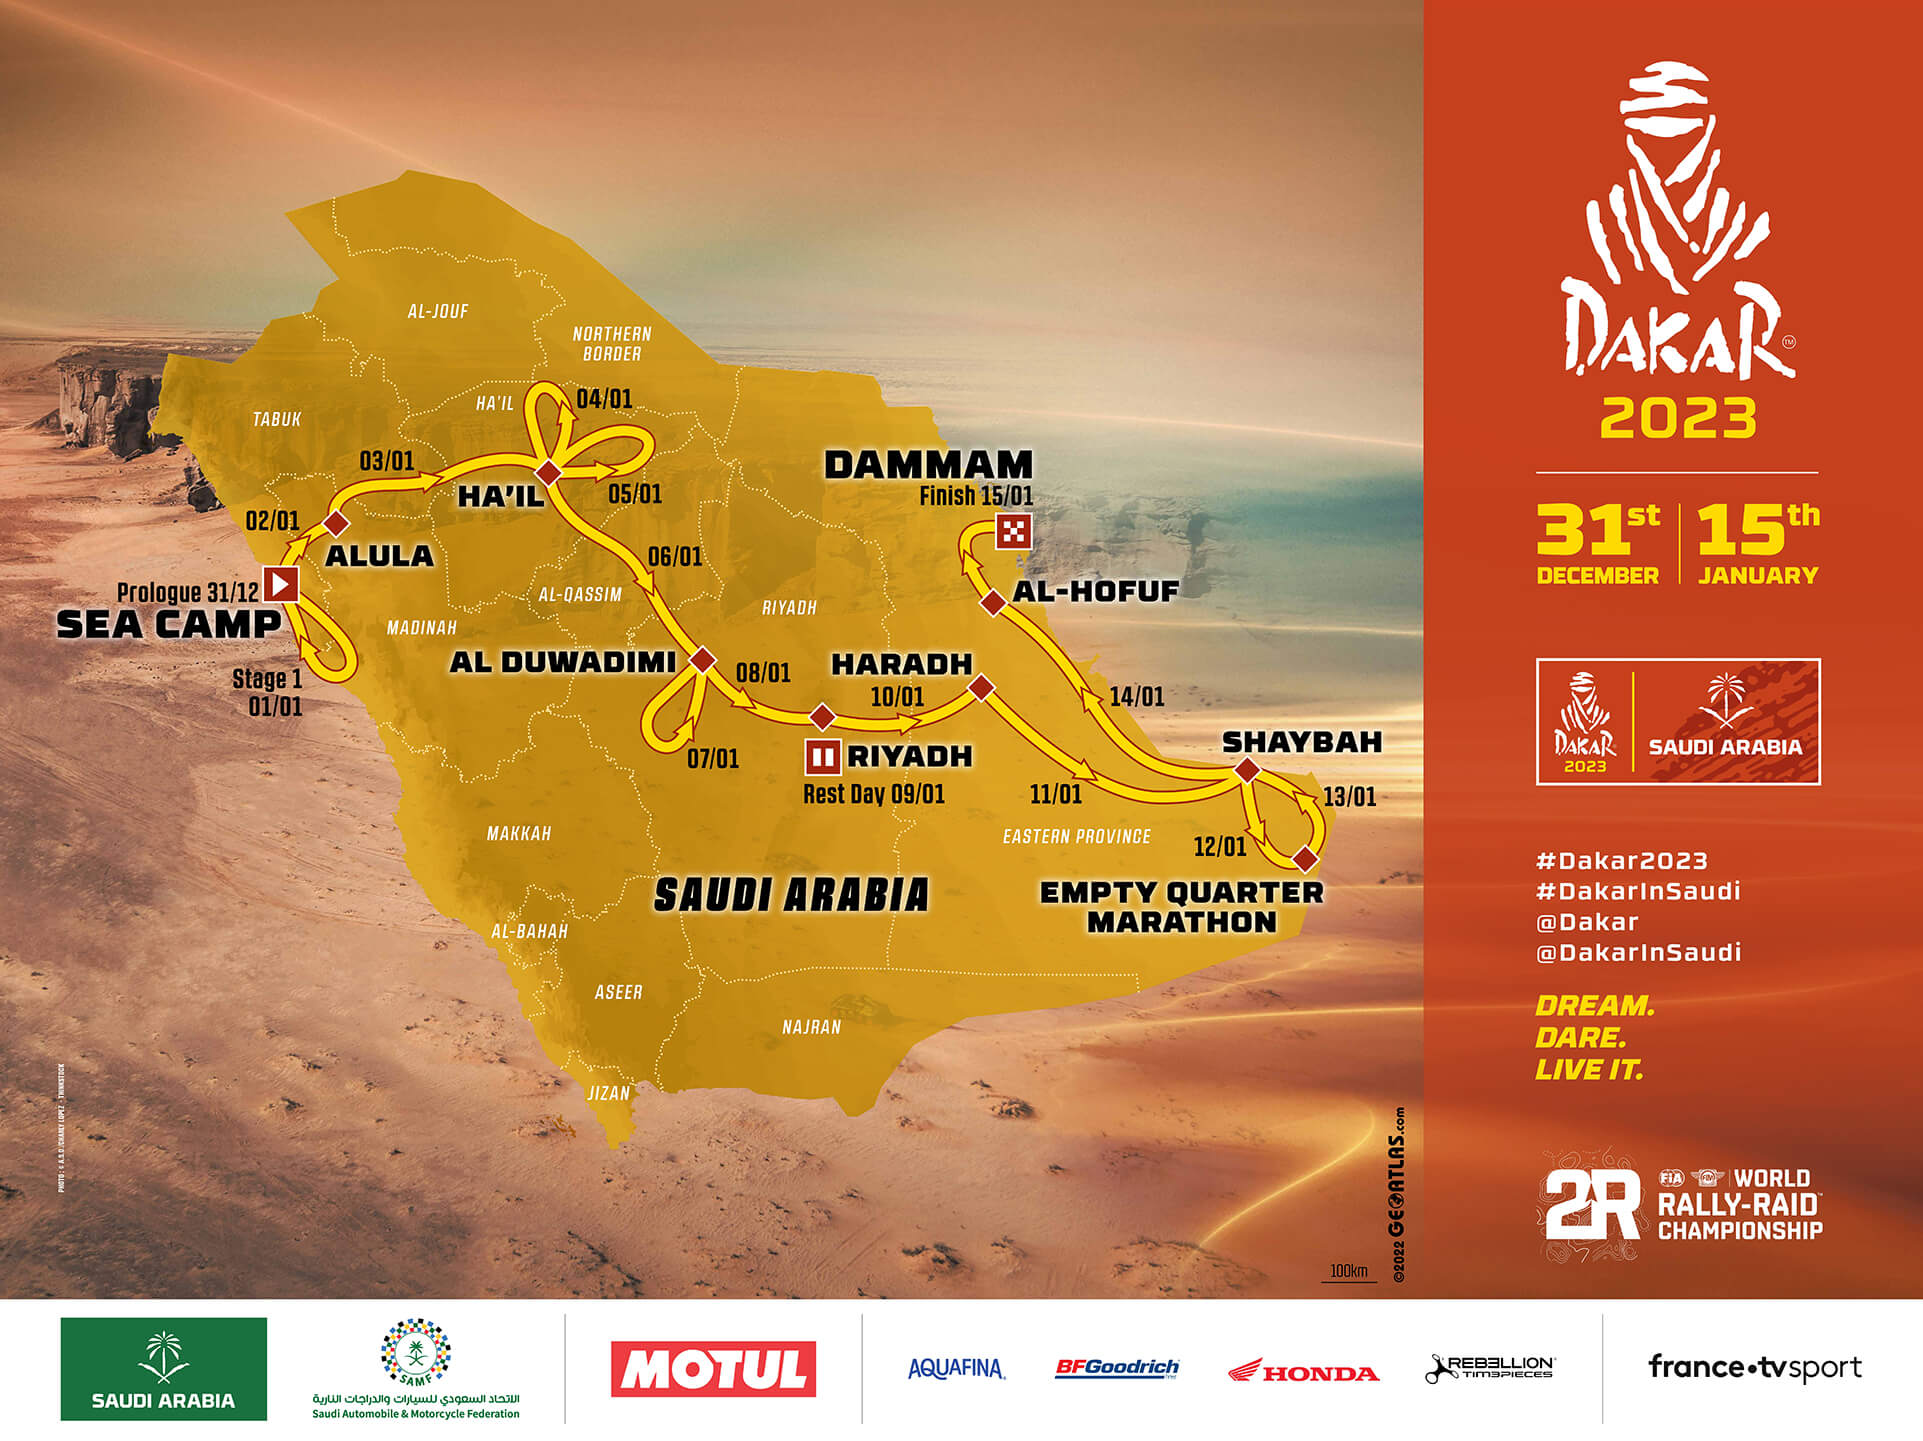 DAKAR RALLY 2023 - SCHEDULE AND ROUTE